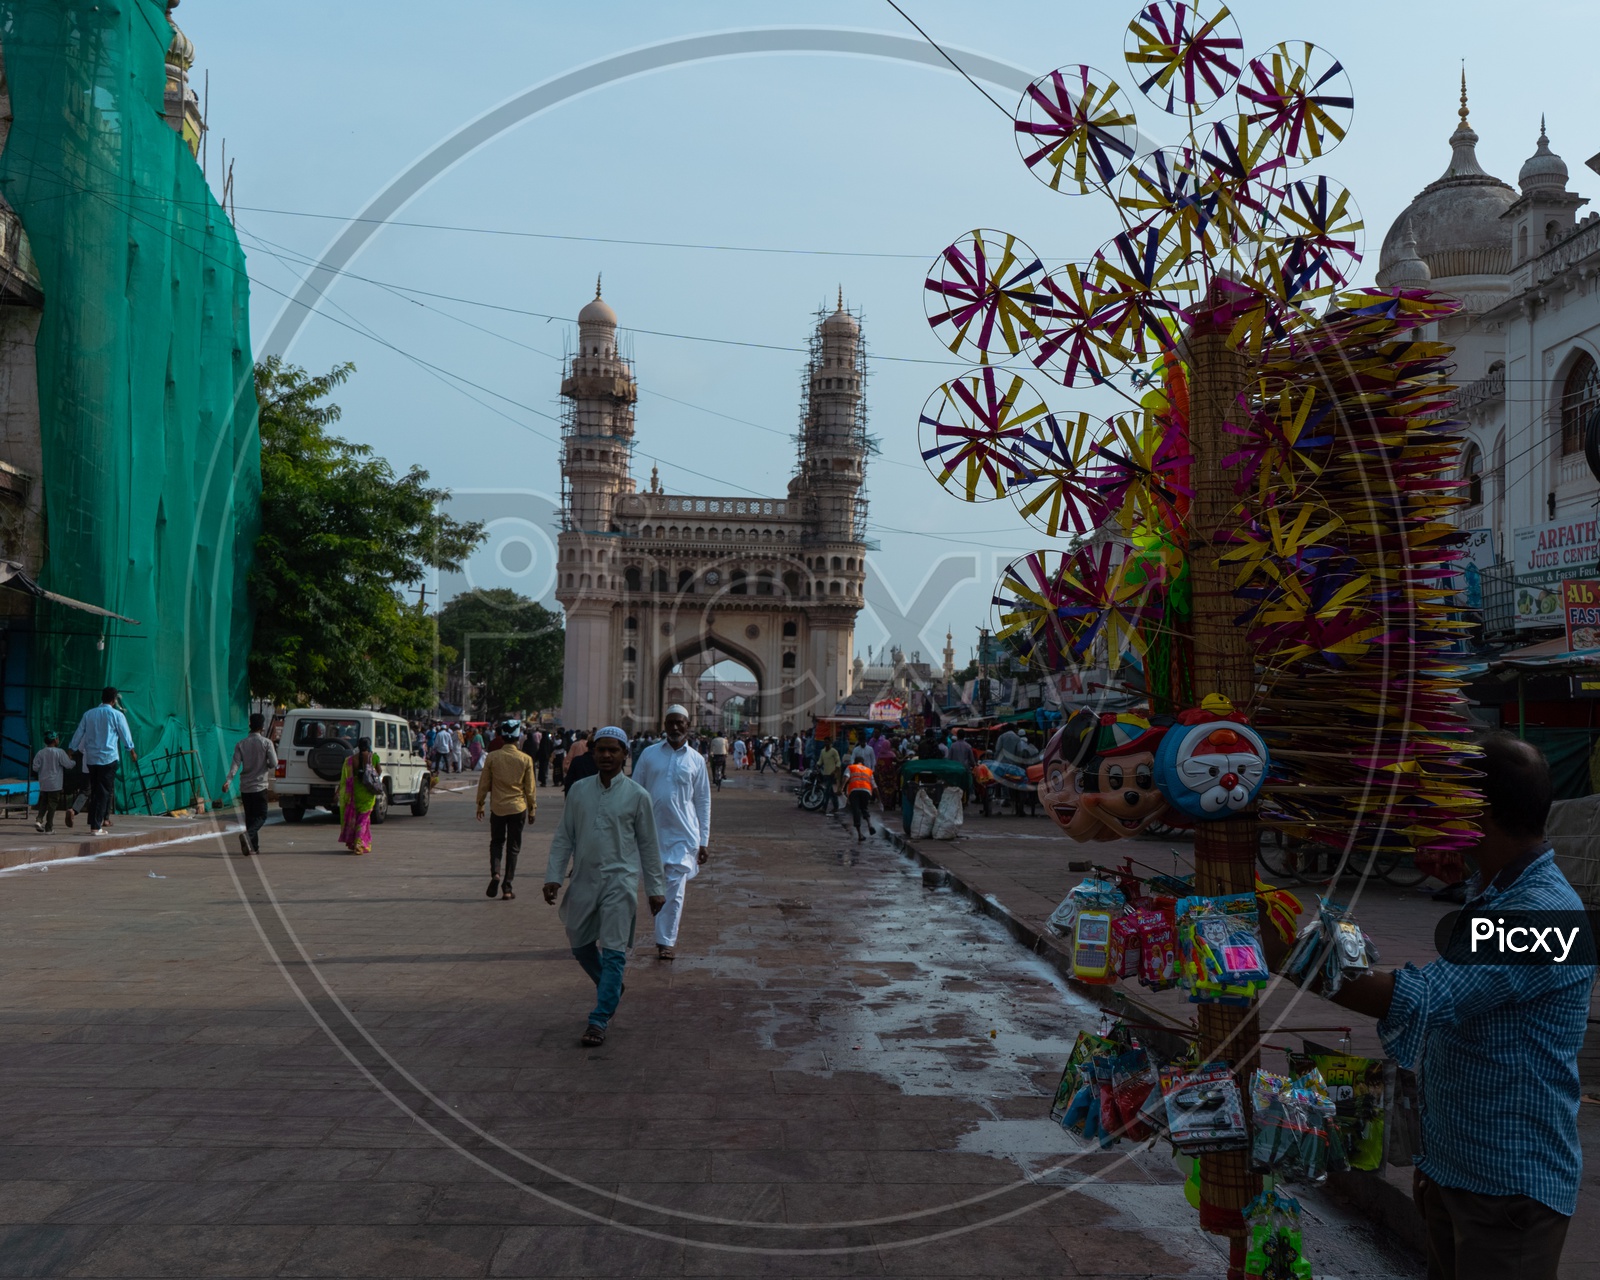 Charminar with a person selling toys in frame